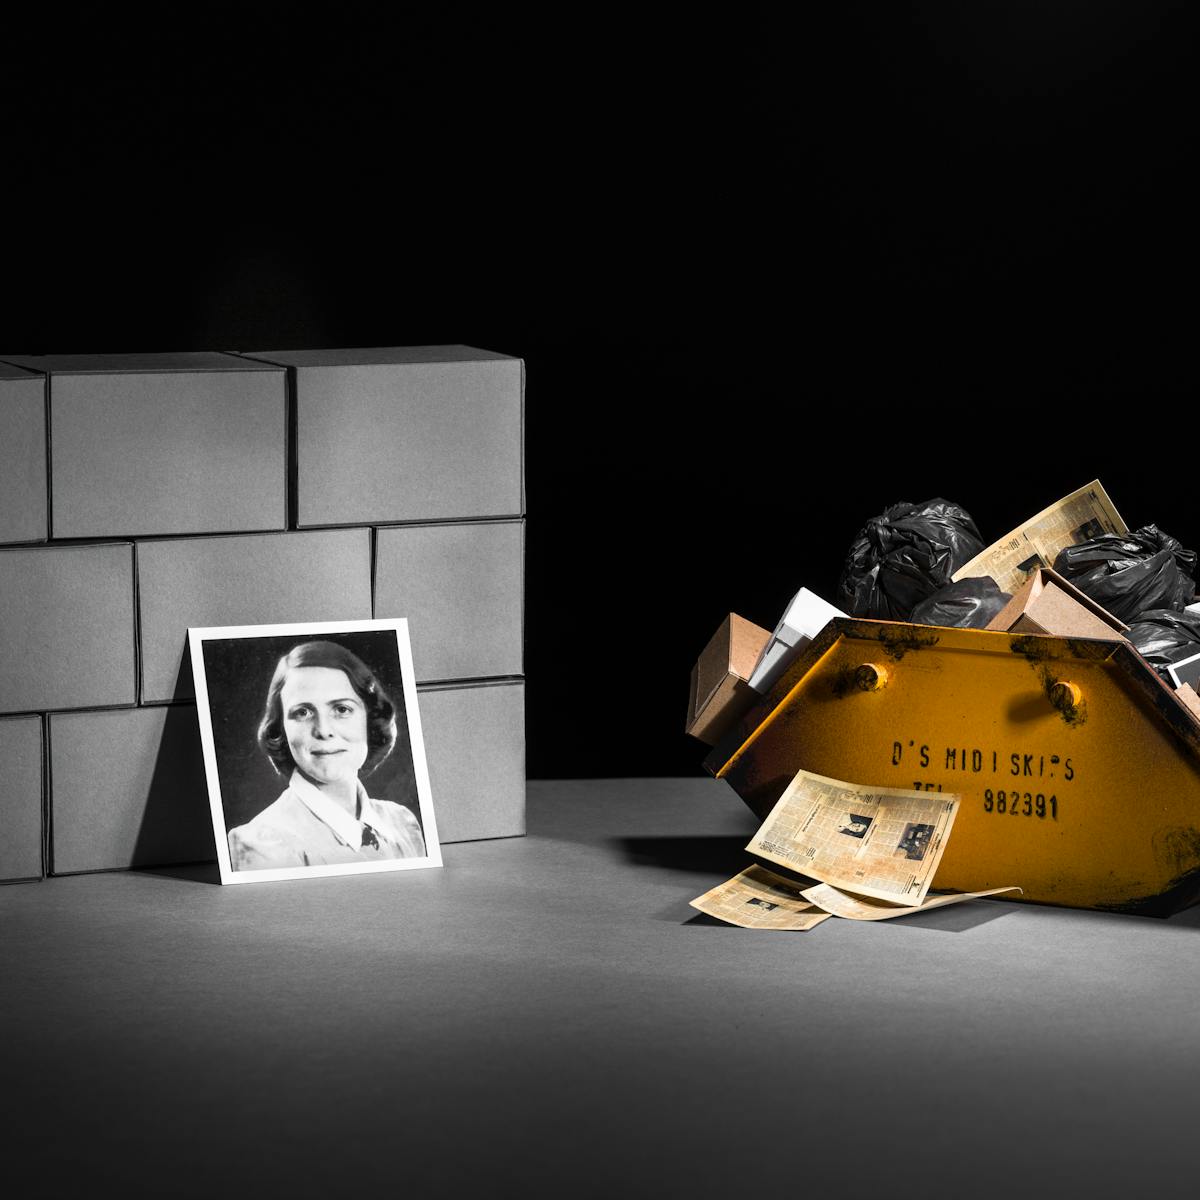 Photograph of a set-built scene made up of a grey card horizontal base against a black vertical background. Built into a mock wall are nine rectangular brick blocks also made out of grey card. To the right of the wall is a yellow skip containing black plastic bags, cardboard boxes and a small photographic print of a protein model. In front of the skip are a pile of yellowed newspapers. Leaning against the brick wall is a photographic portrait of a young woman with short hair wearing a blouse. 
